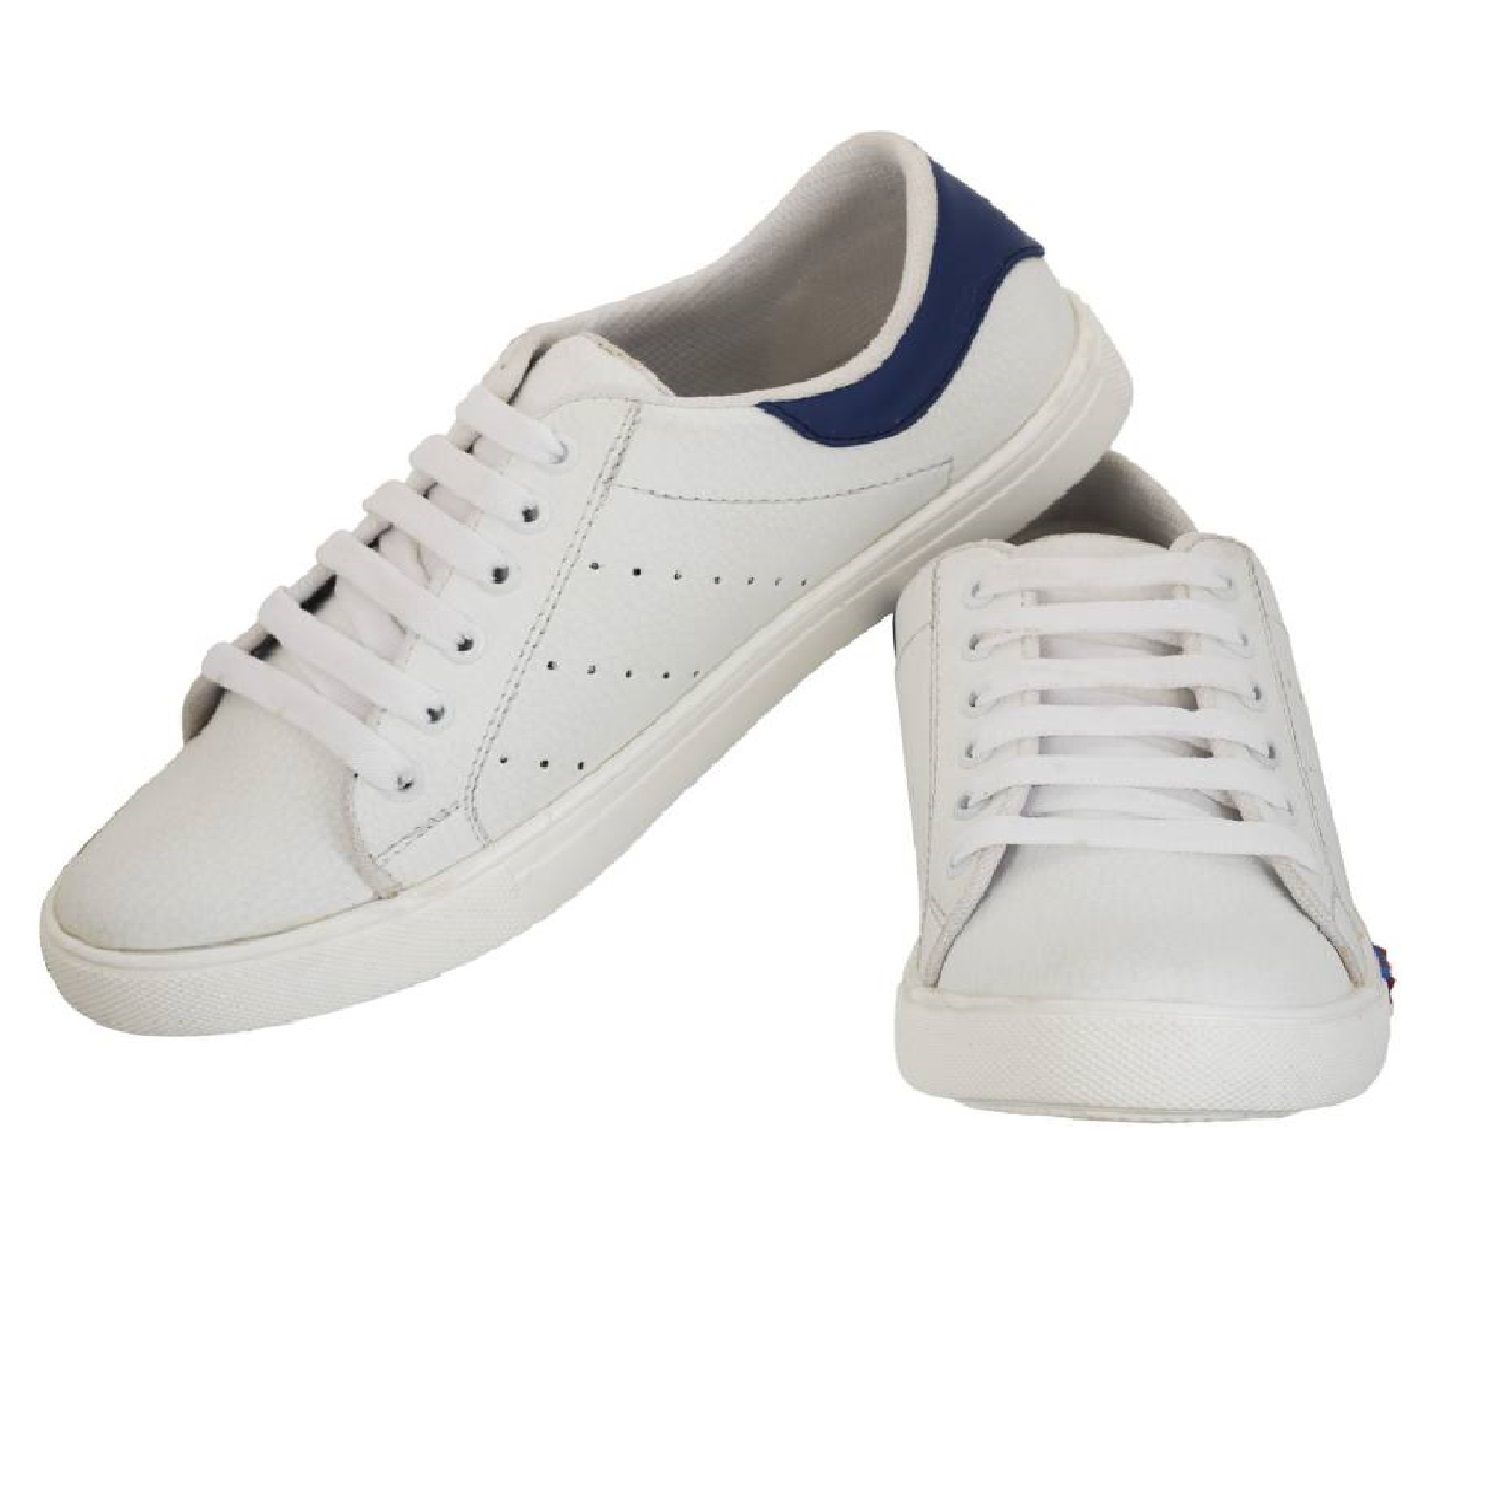 ADDY WHITE BLUE Sneakers White Casual Shoes - Buy ADDY WHITE BLUE ...